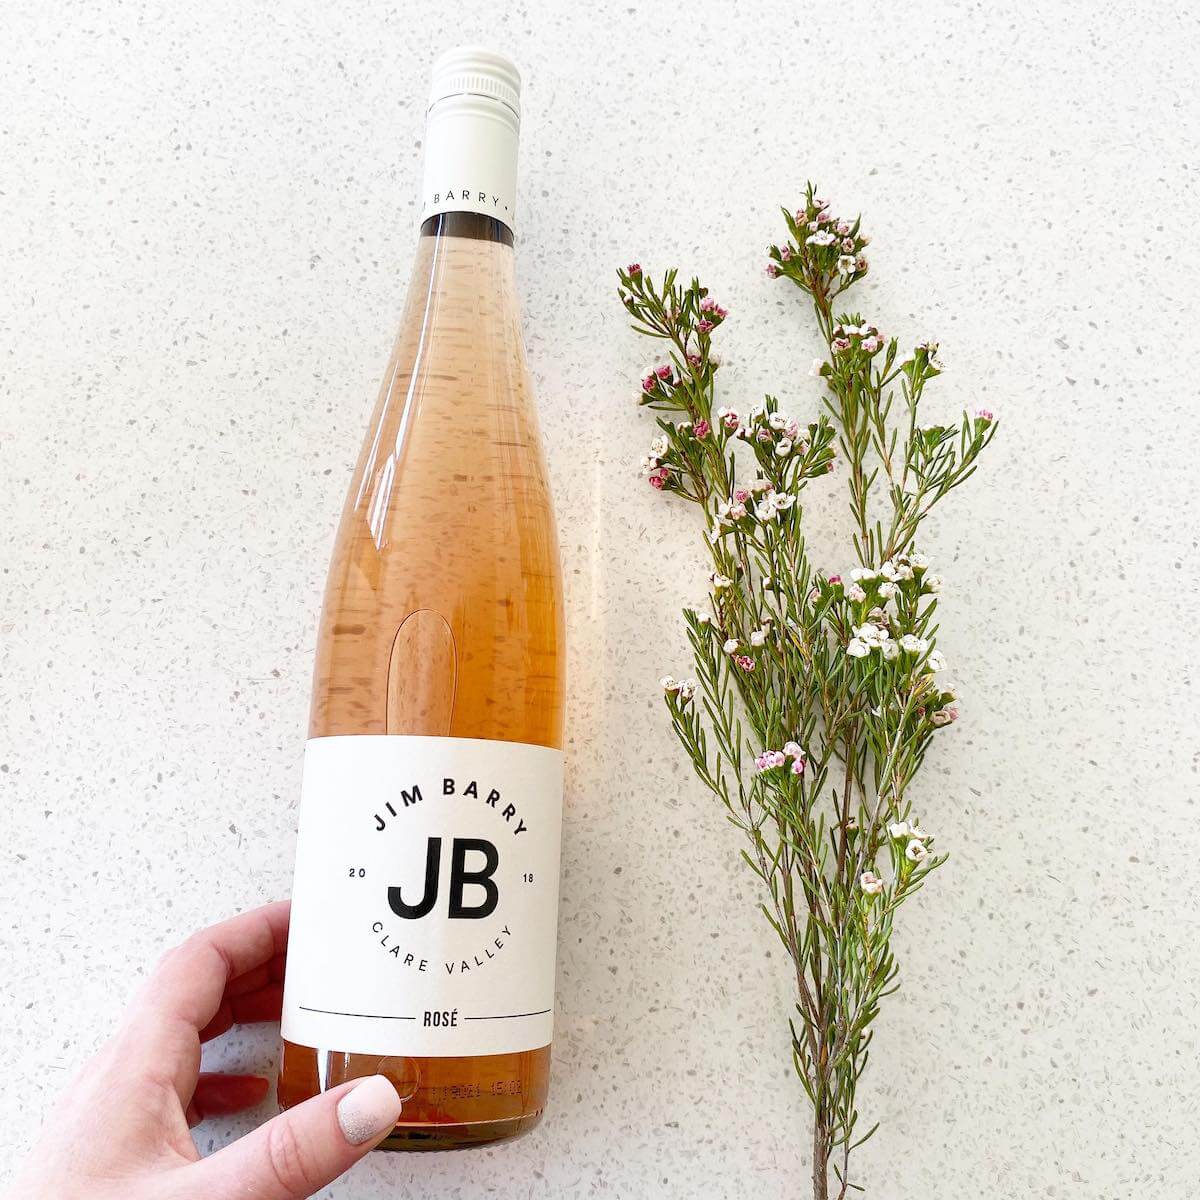 Jim Barry JB 2018 Rose - Clare Valley